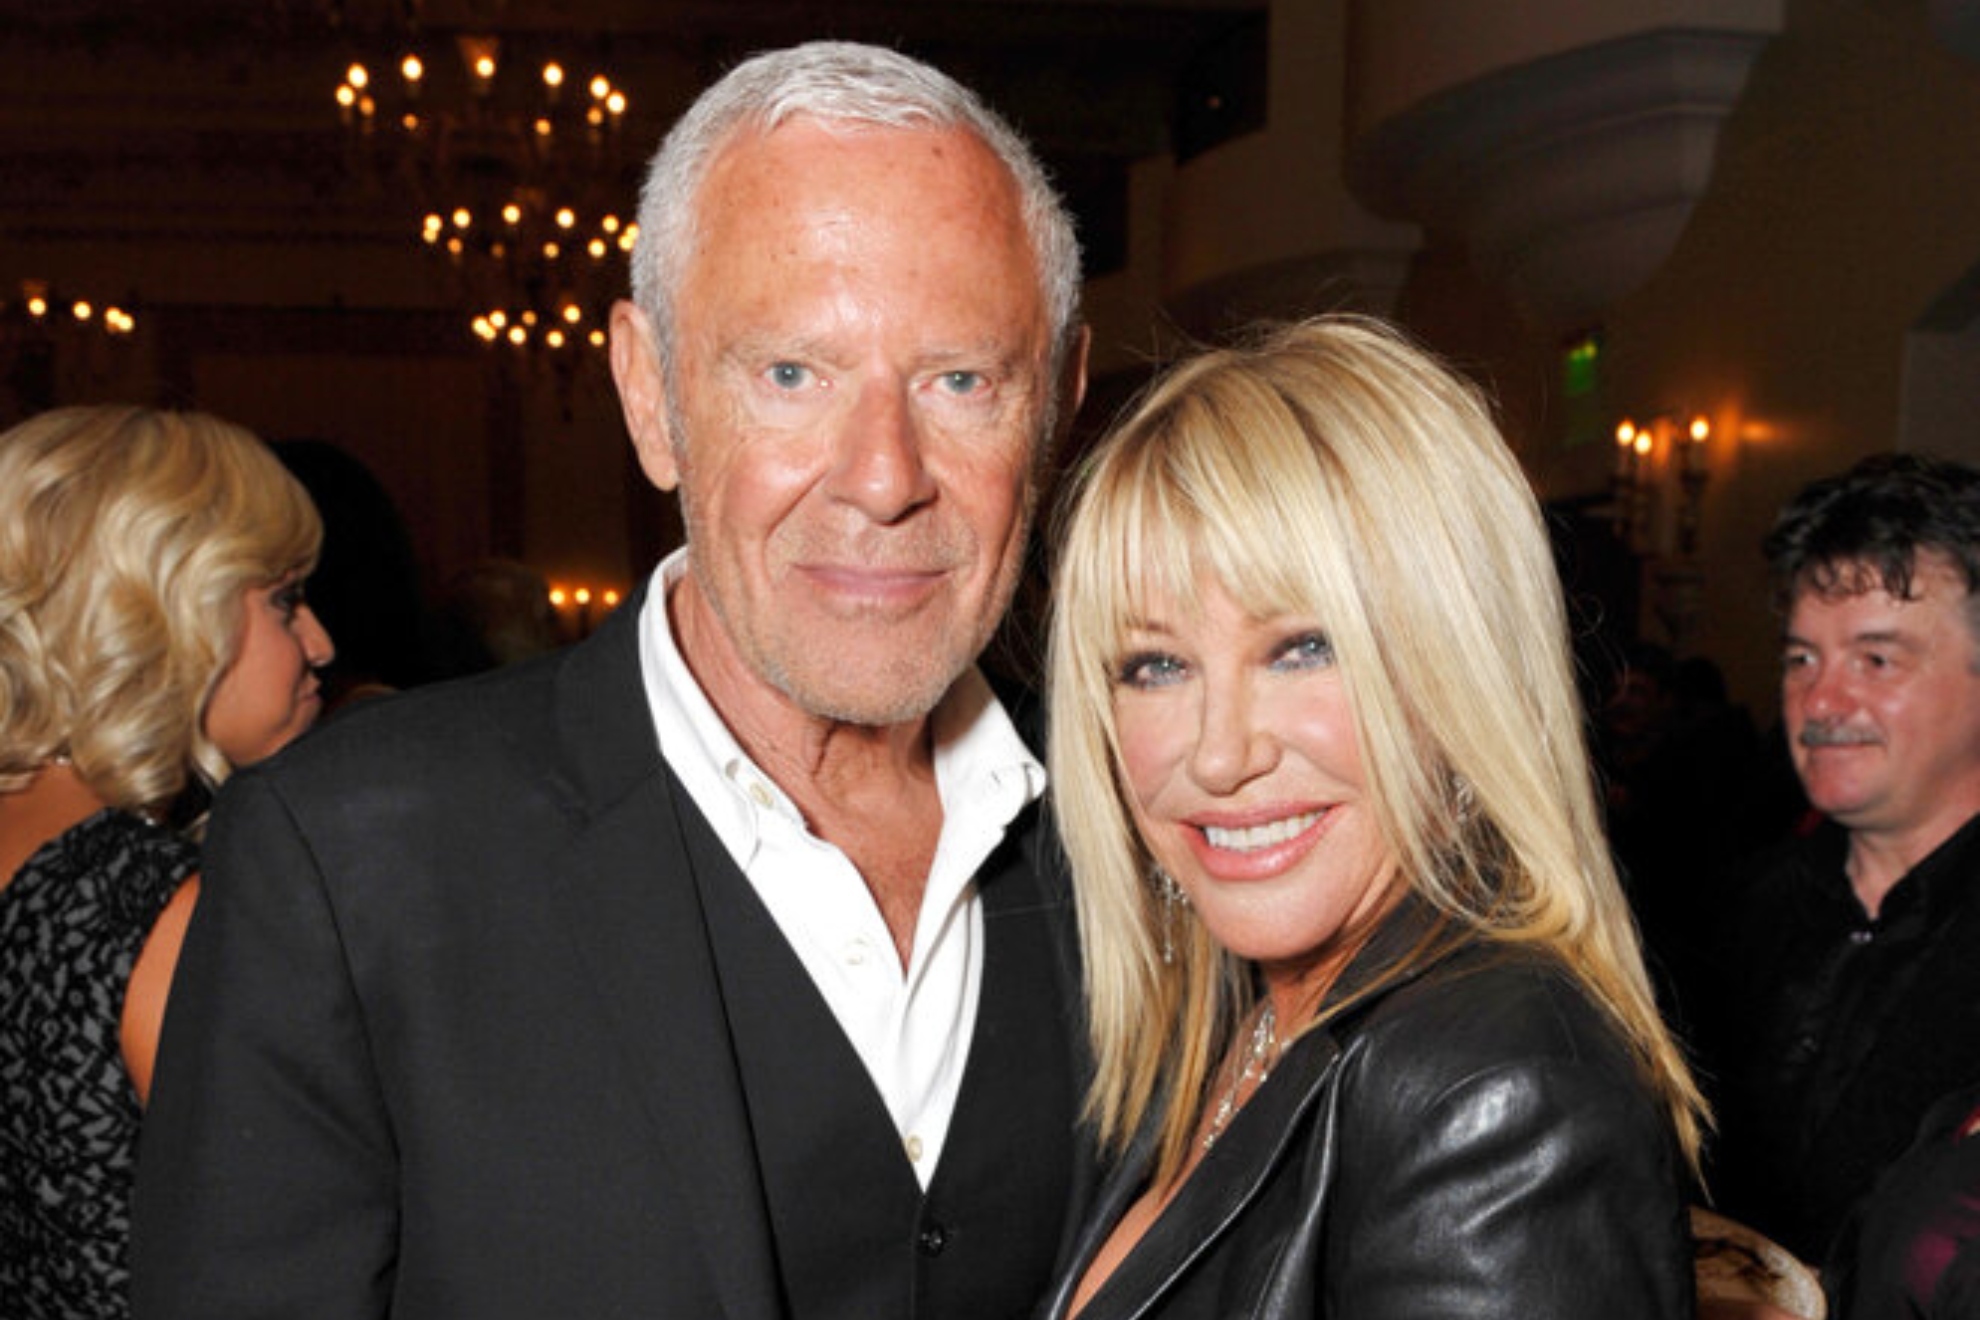 Suzanne Somers husband reveals honest opinion after Oscars In Memoriam presentation